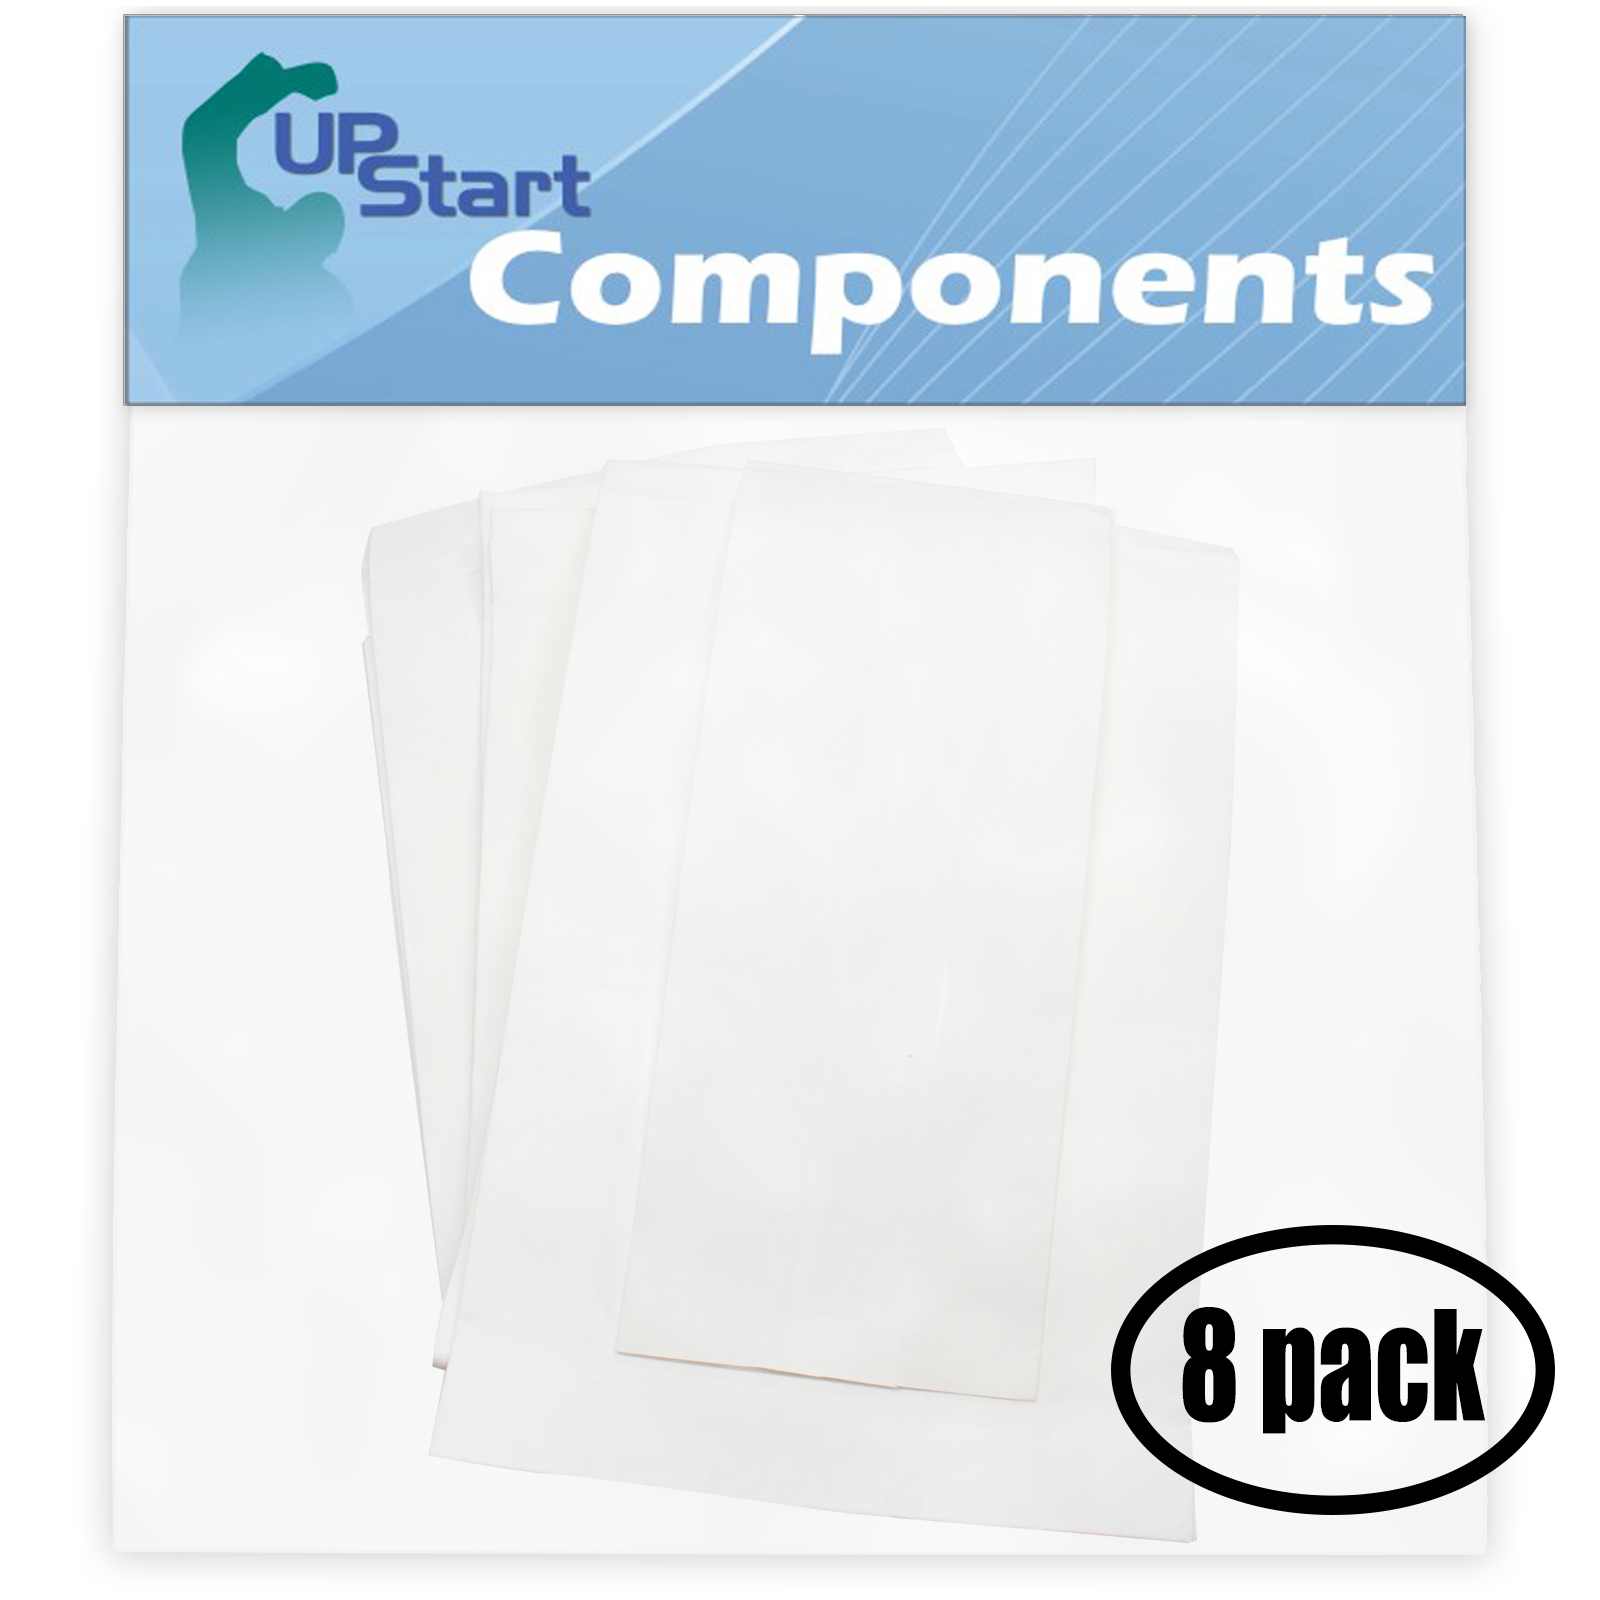 24 Replacement for Singer SST185 Vacuum Bags - Compatible with Singer SUB-1 Vacuum Bags (8-Pack - 3 Vacuum Bags per Pack) - image 1 of 4